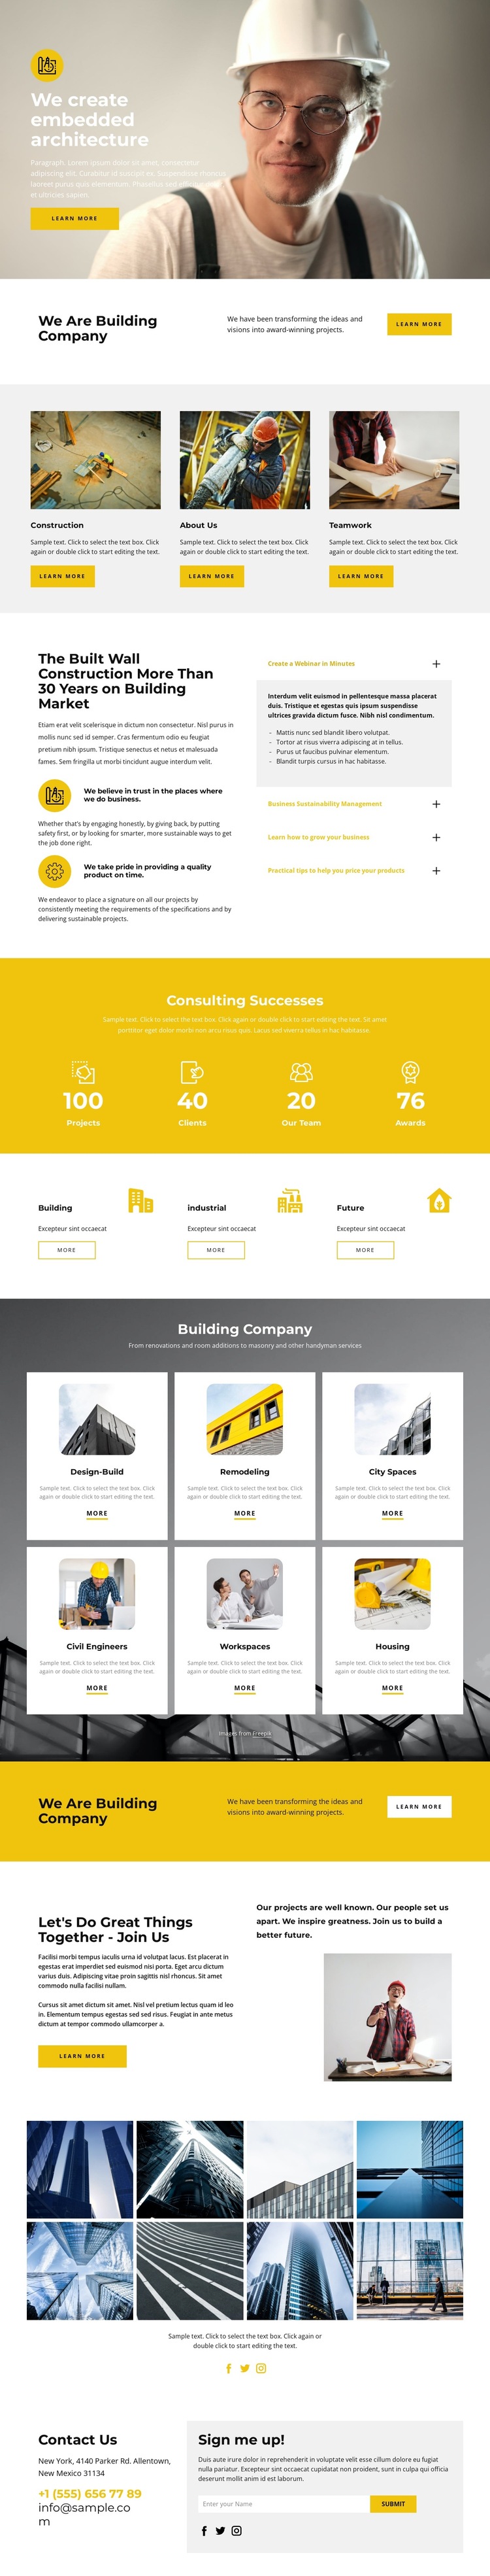 Let's build a turnkey HTML5 Template